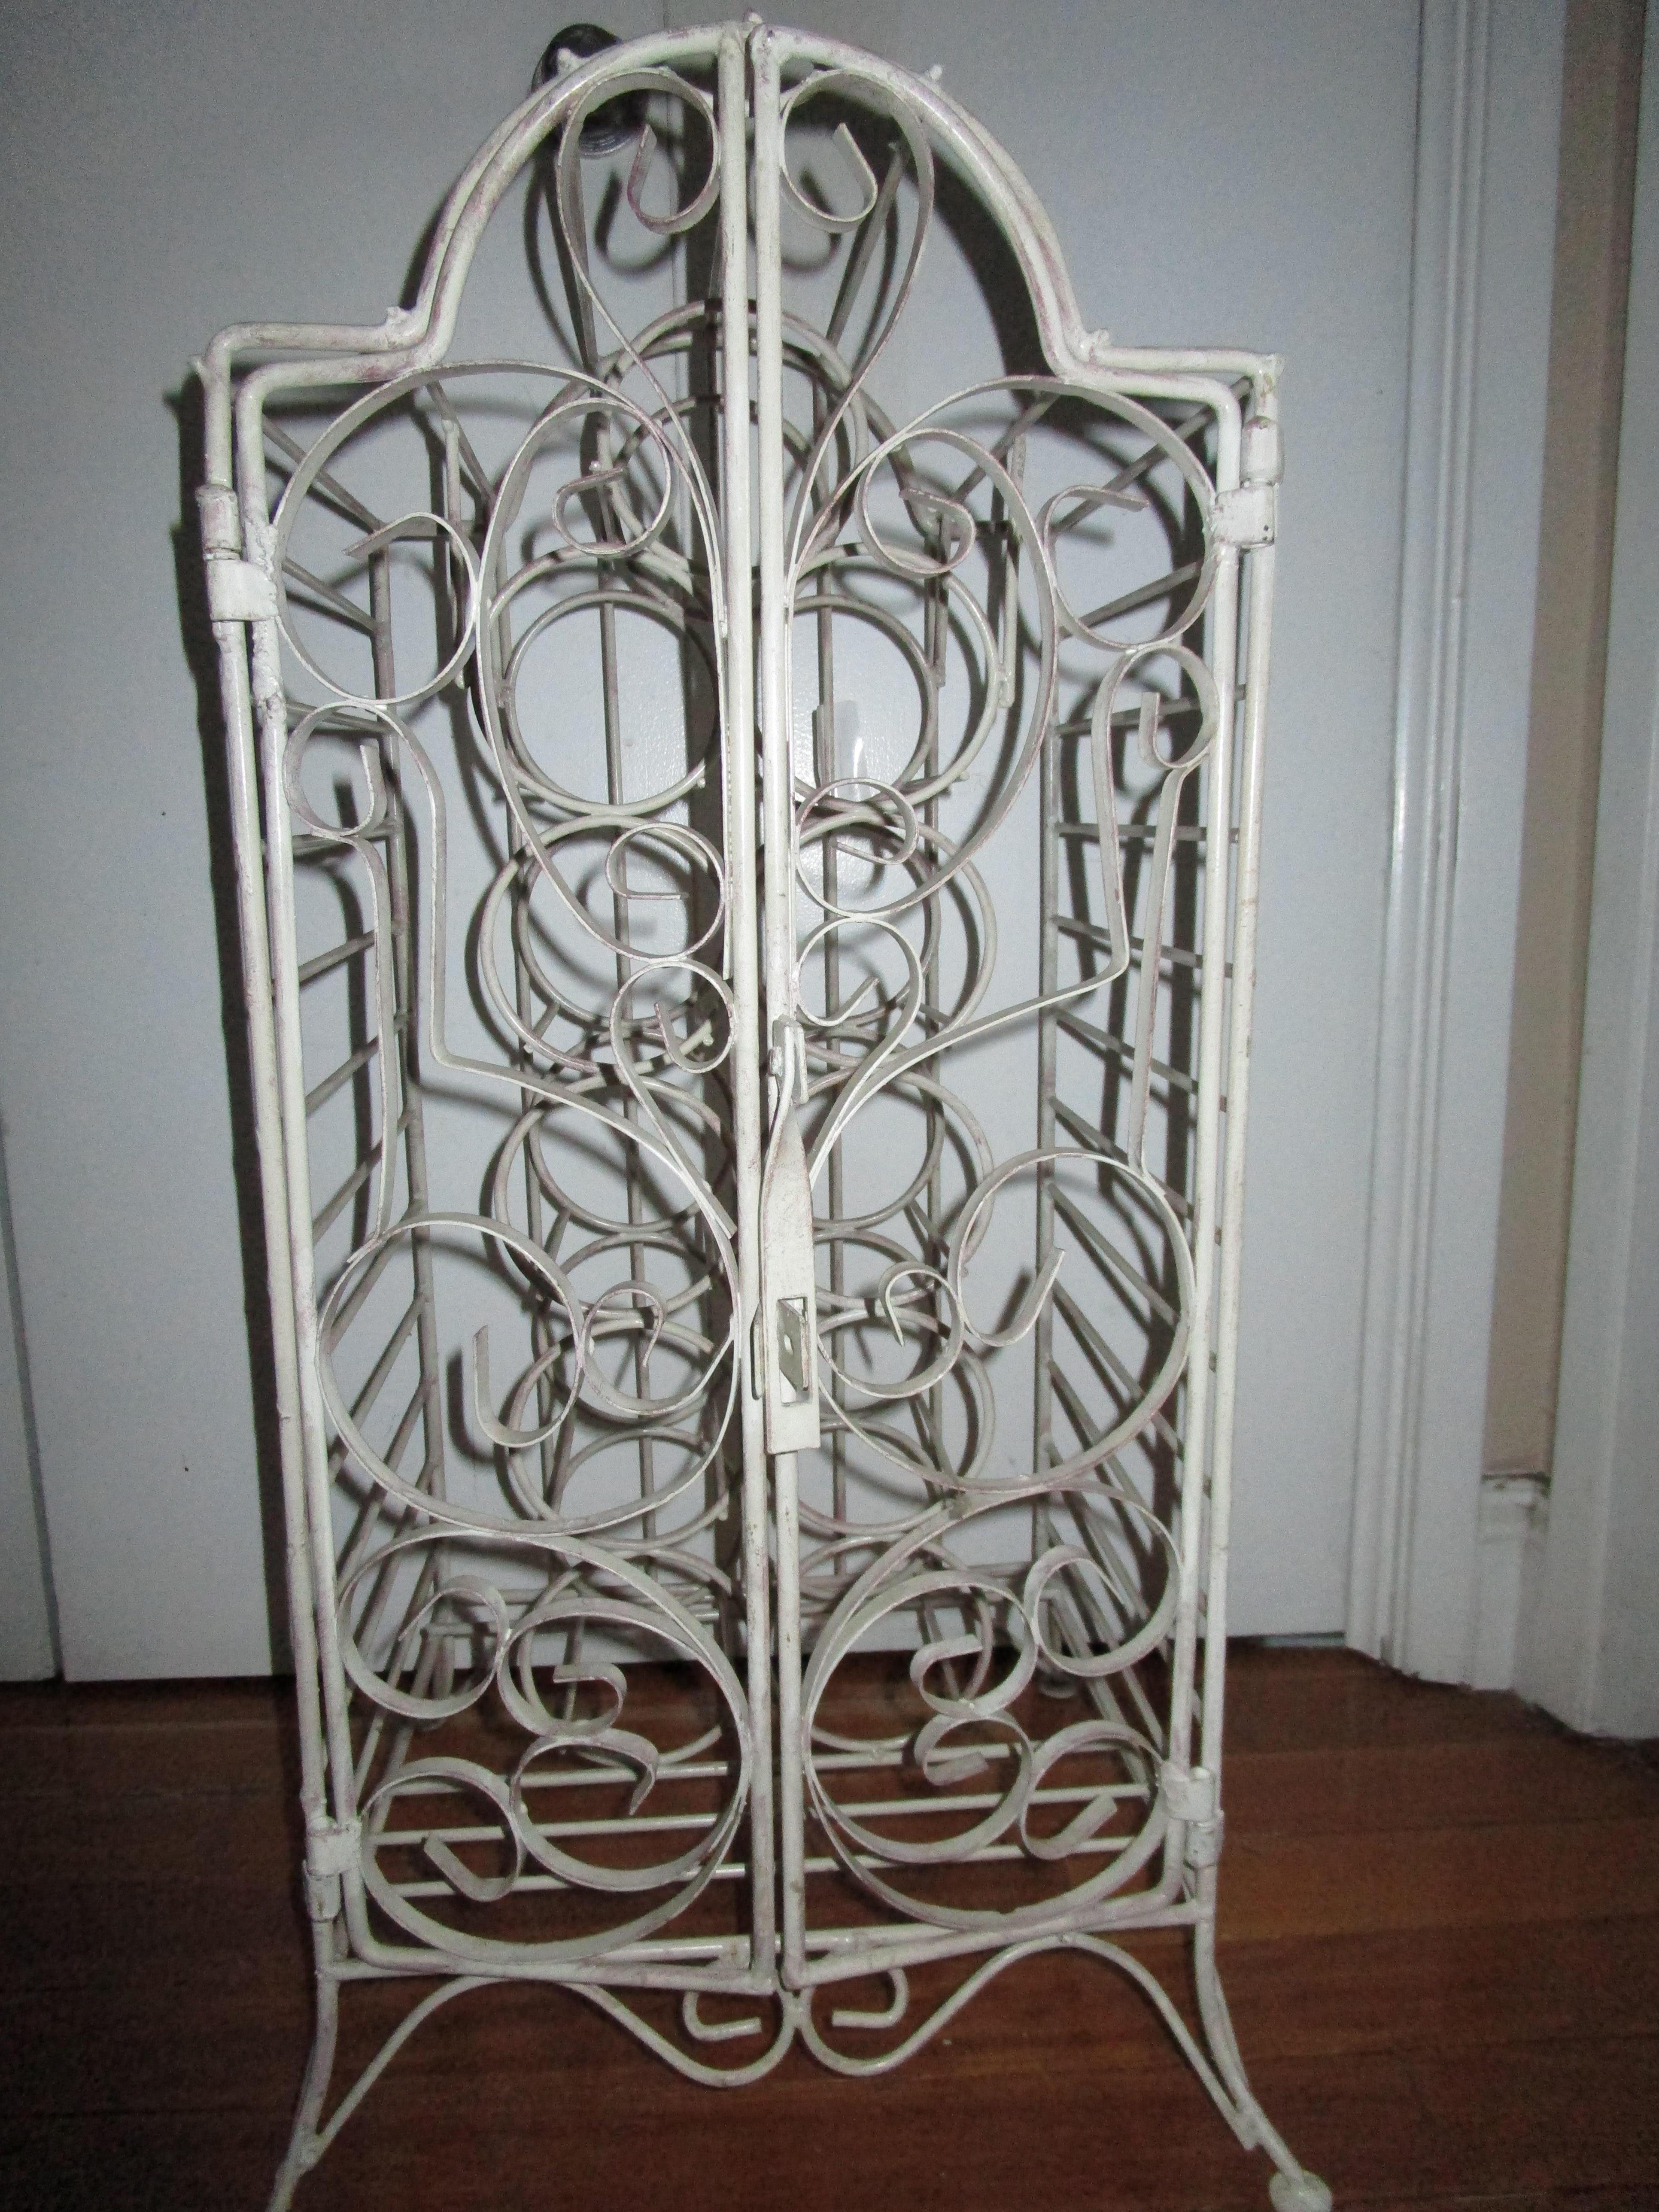 The intricate wrought iron pattern, the latch for private reserve and the French feel make this wine cabinet a standout. A vintage French style white-painted wrought iron wine cabinet from the mid 20th Century stands ready to accept your private cru